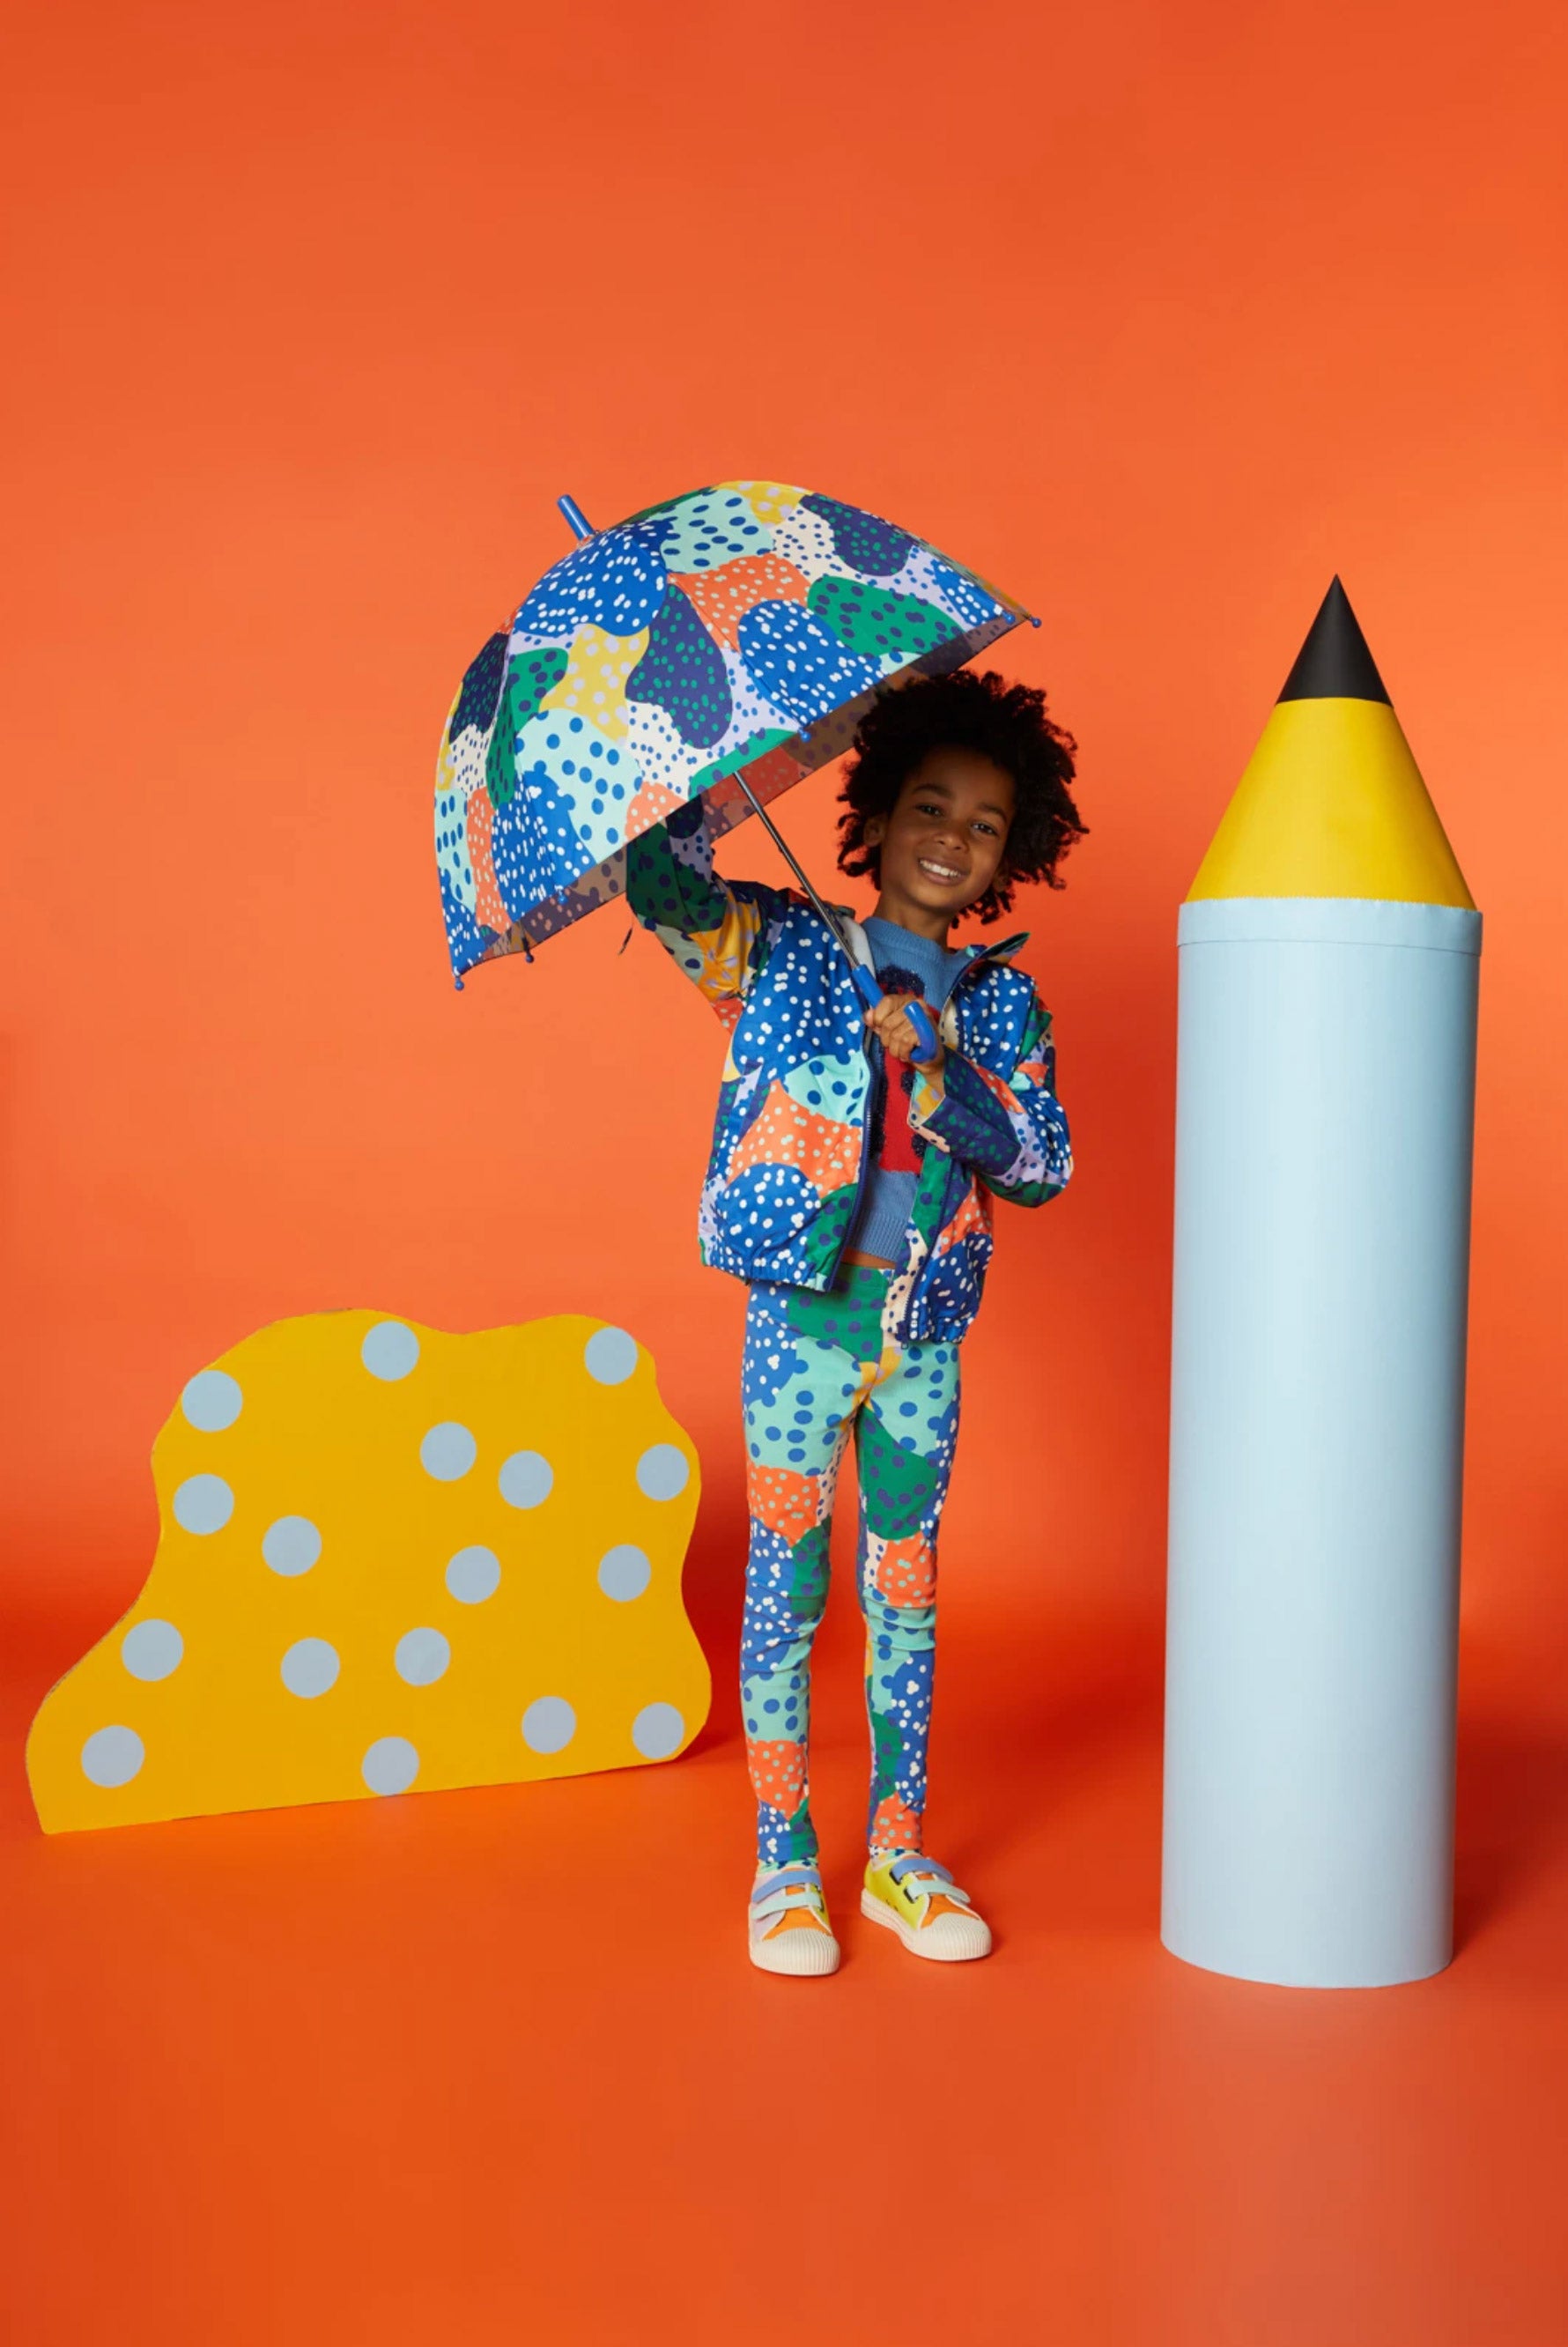 A boy with a colourful umbrella stands against an orange background with an oversized blue pencil prop, and a yellow abstract cardboard cutout prop with blue polkadots. 